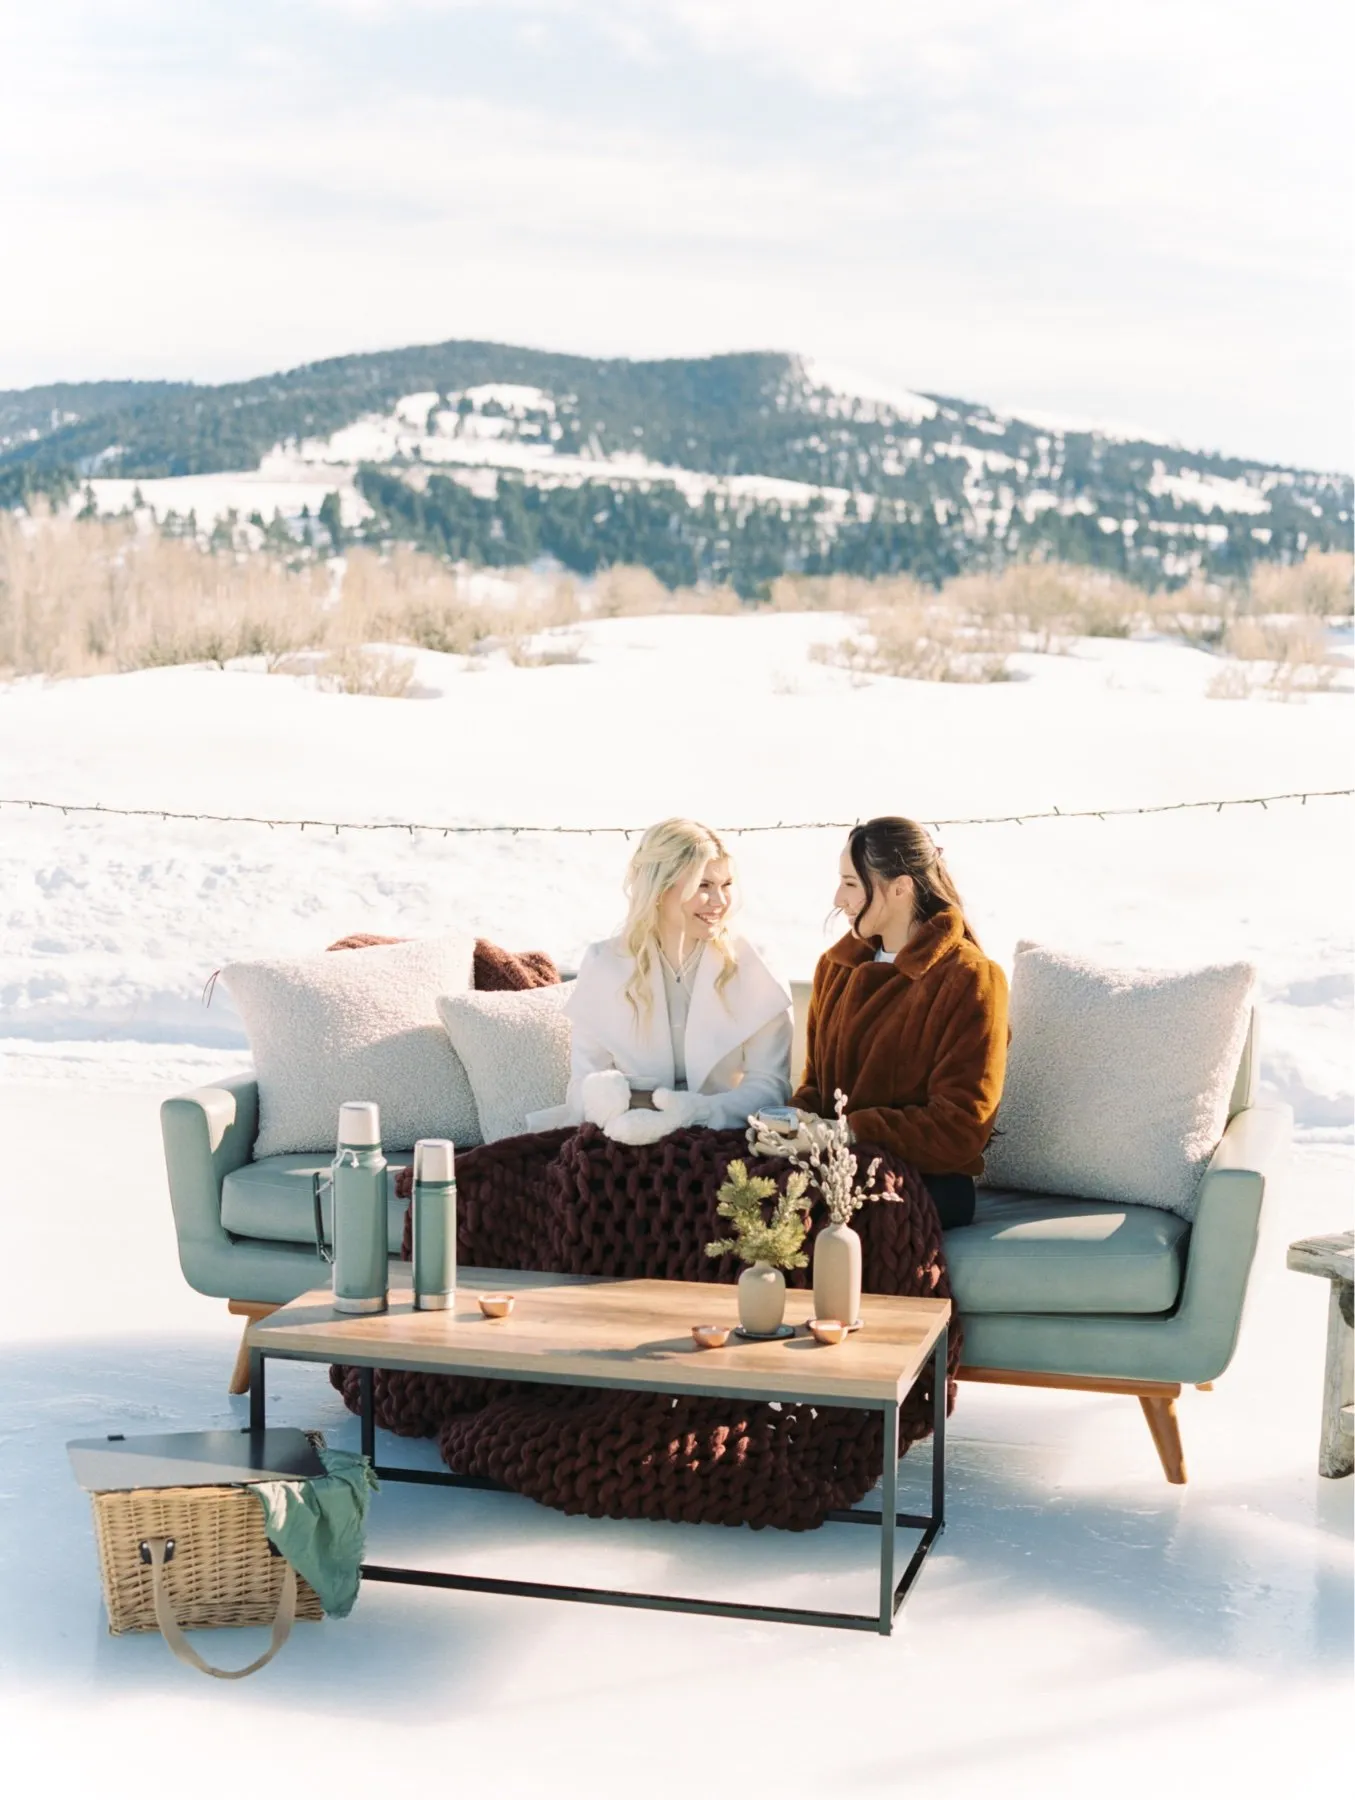 Two women seated on a couch in the snow